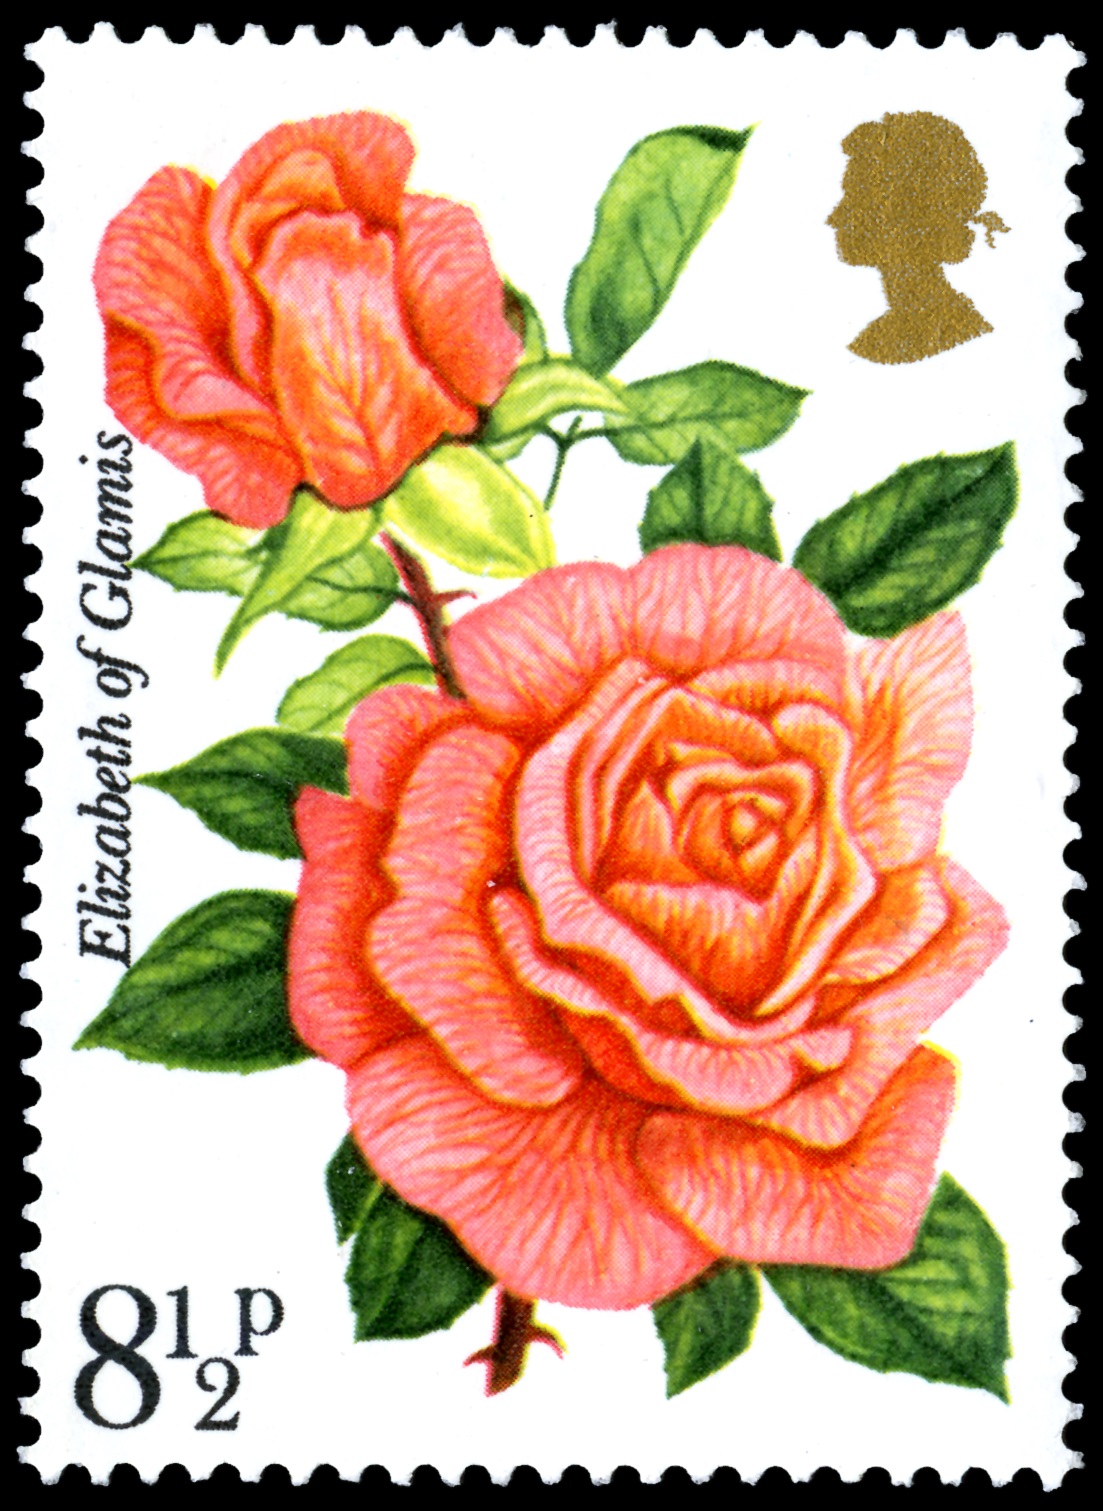 Red rose stamp with a value of 8 and a half pence.